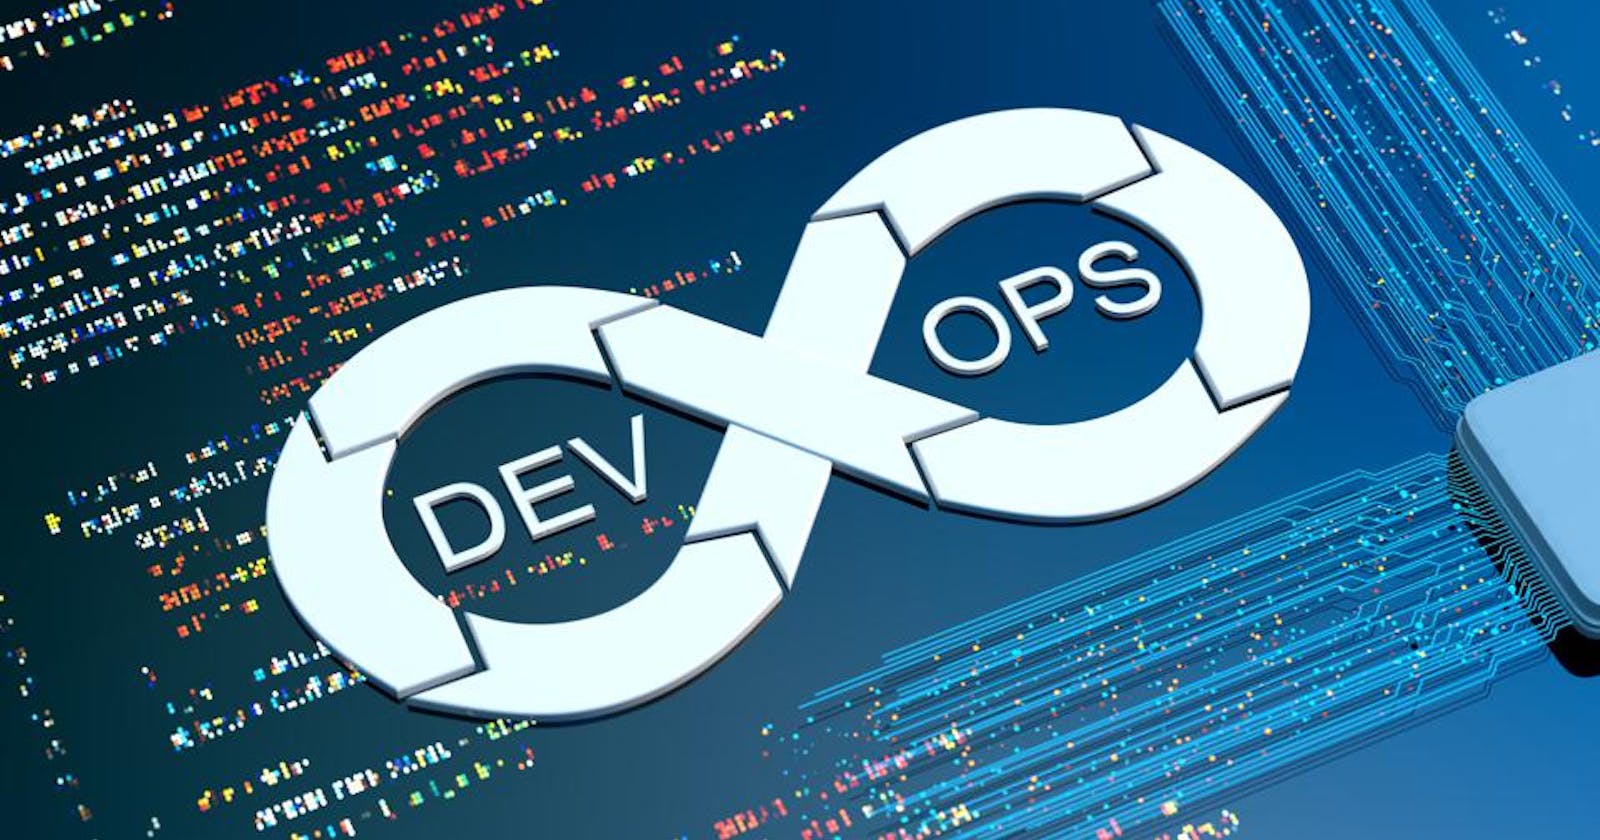 Want to learn DevOps quickly?